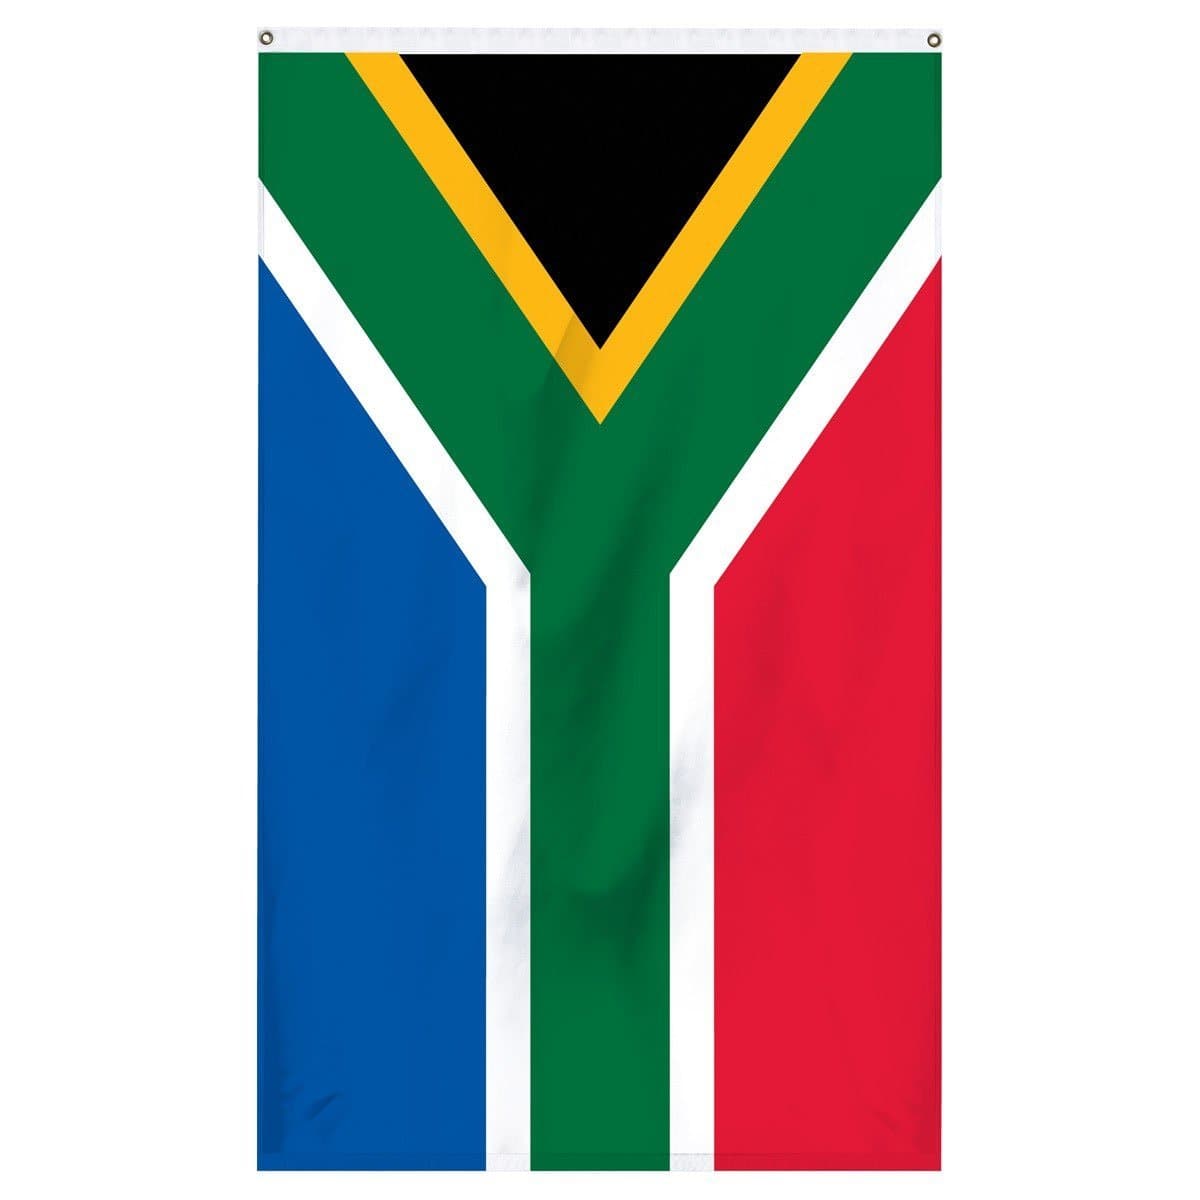 South Africa National flag for sale to buy online from Atlantic Flag and Pole. Black, yellow, green, white, red, and blue colored flag.